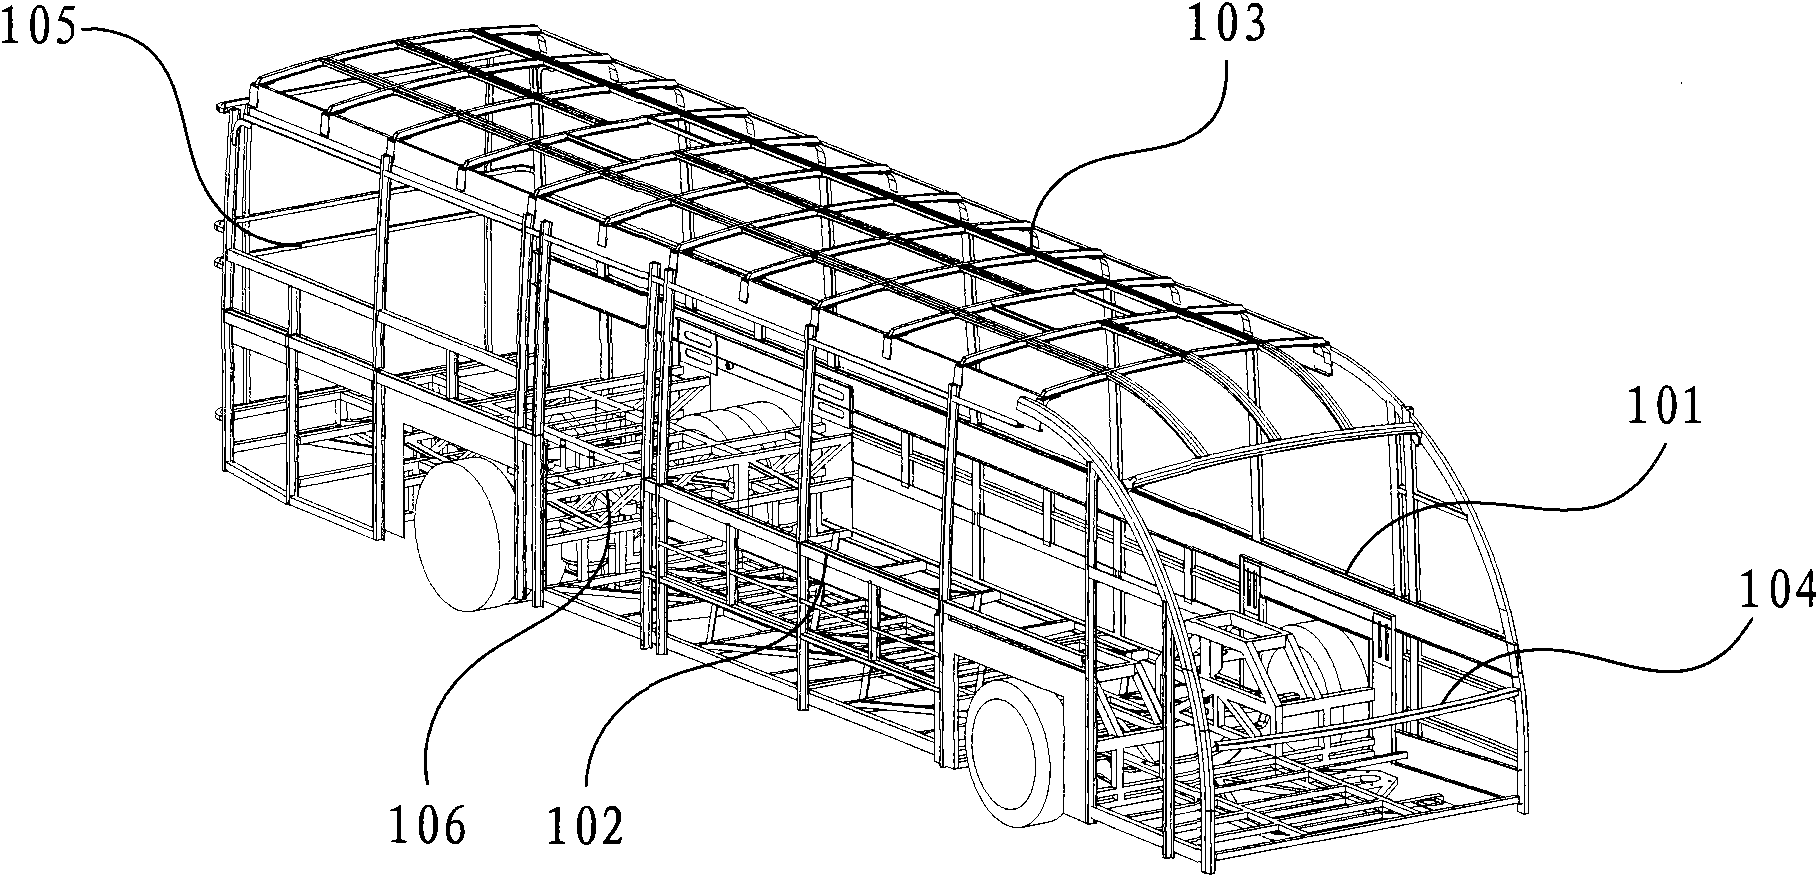 Lightweight total-bearing body frame structure